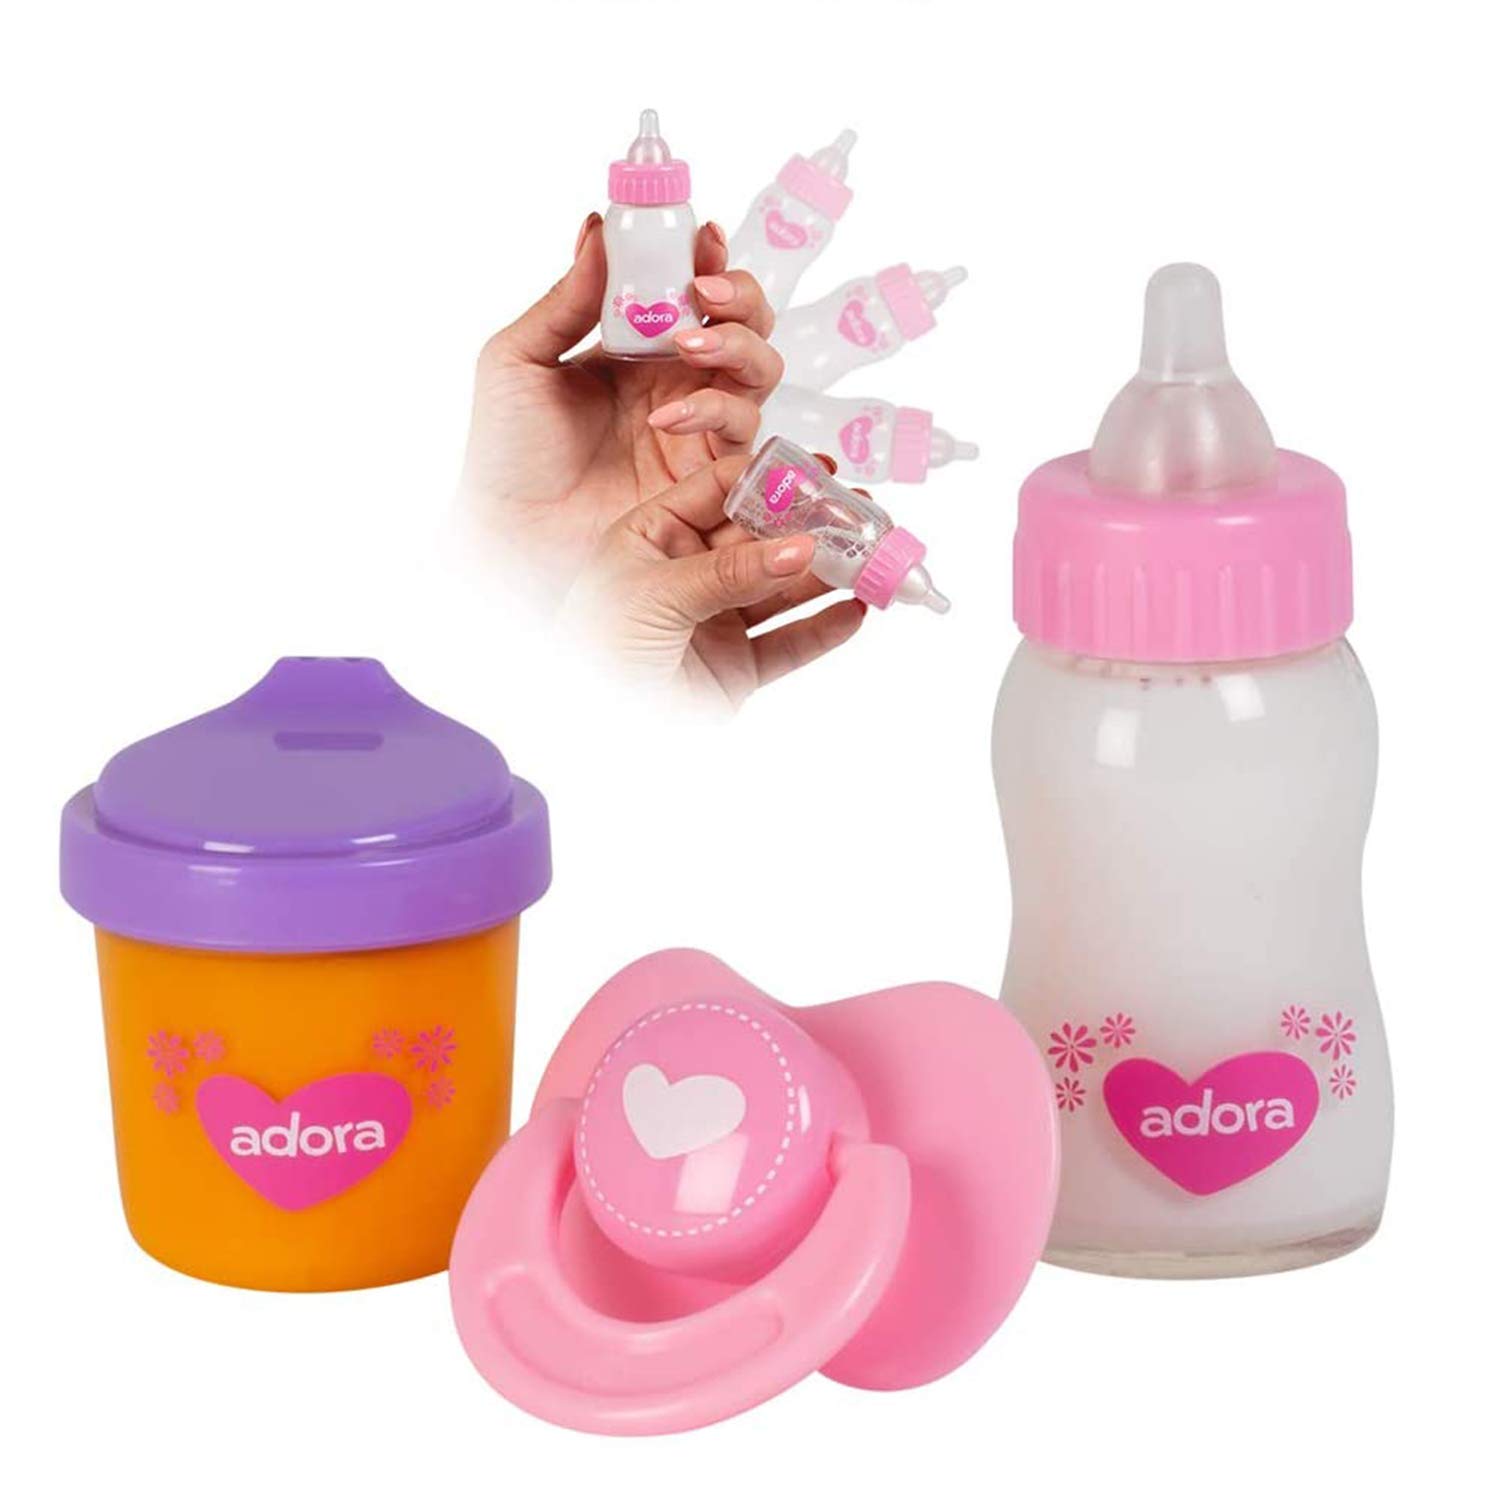 Adora Baby Doll Accessories Magic Sippy Set, Pacifier and Magic Baby Doll Bottles with Disappearing Milk and Orange Juice